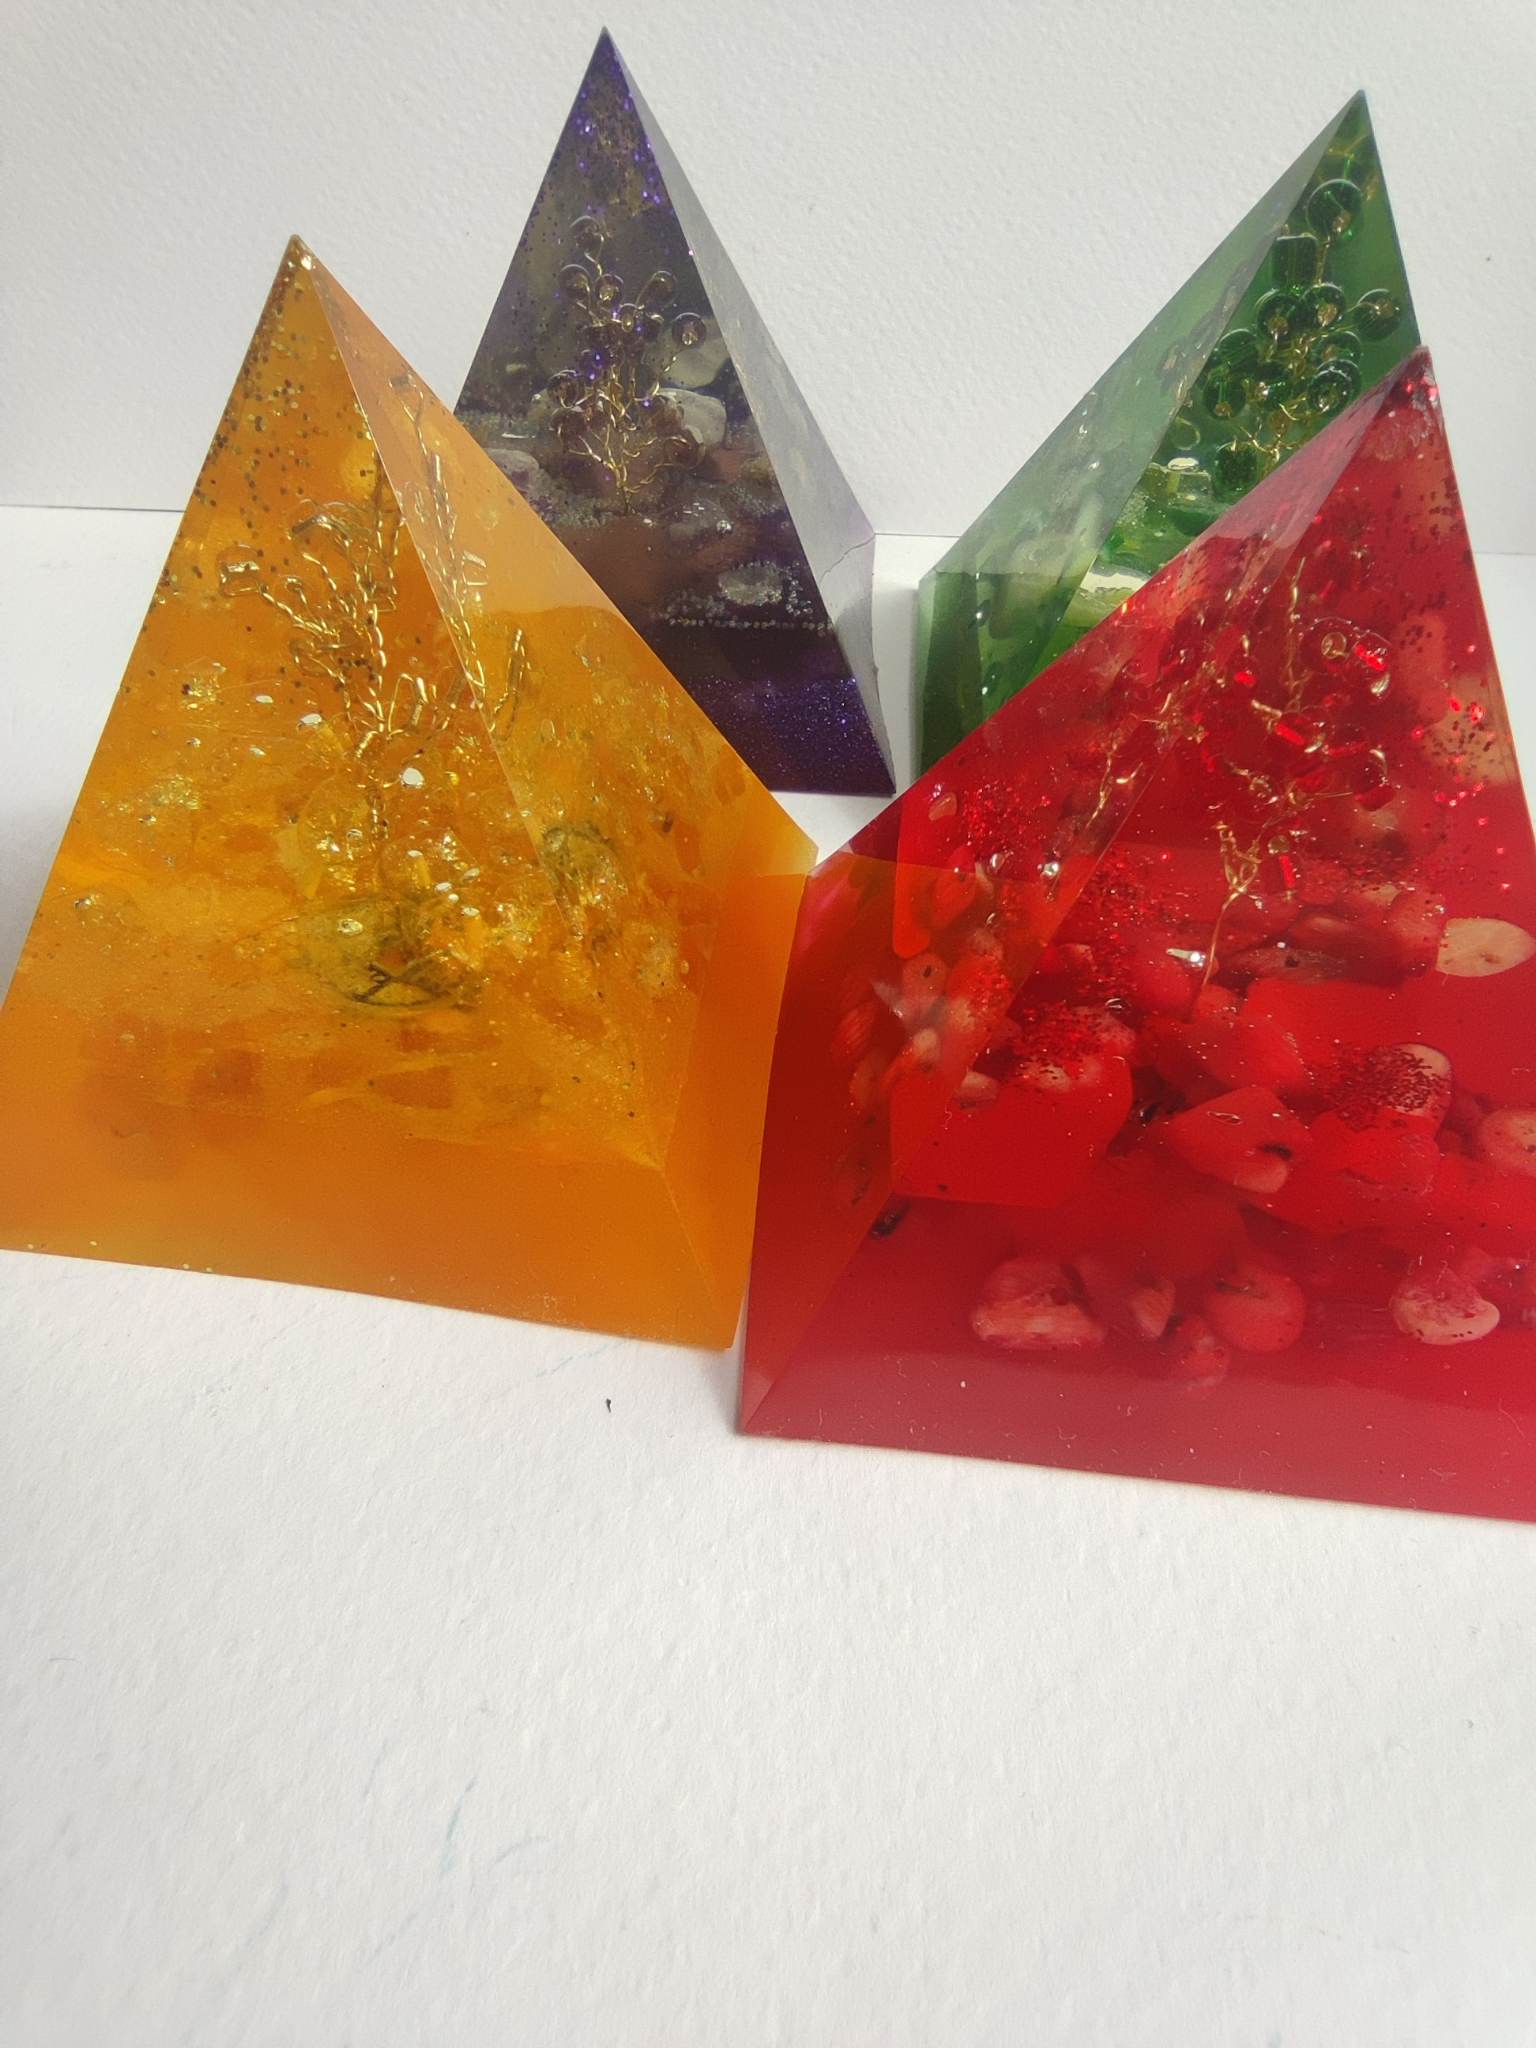 Orgone pyramid for attracting success, energy, and health - "Tree of Success" - XL